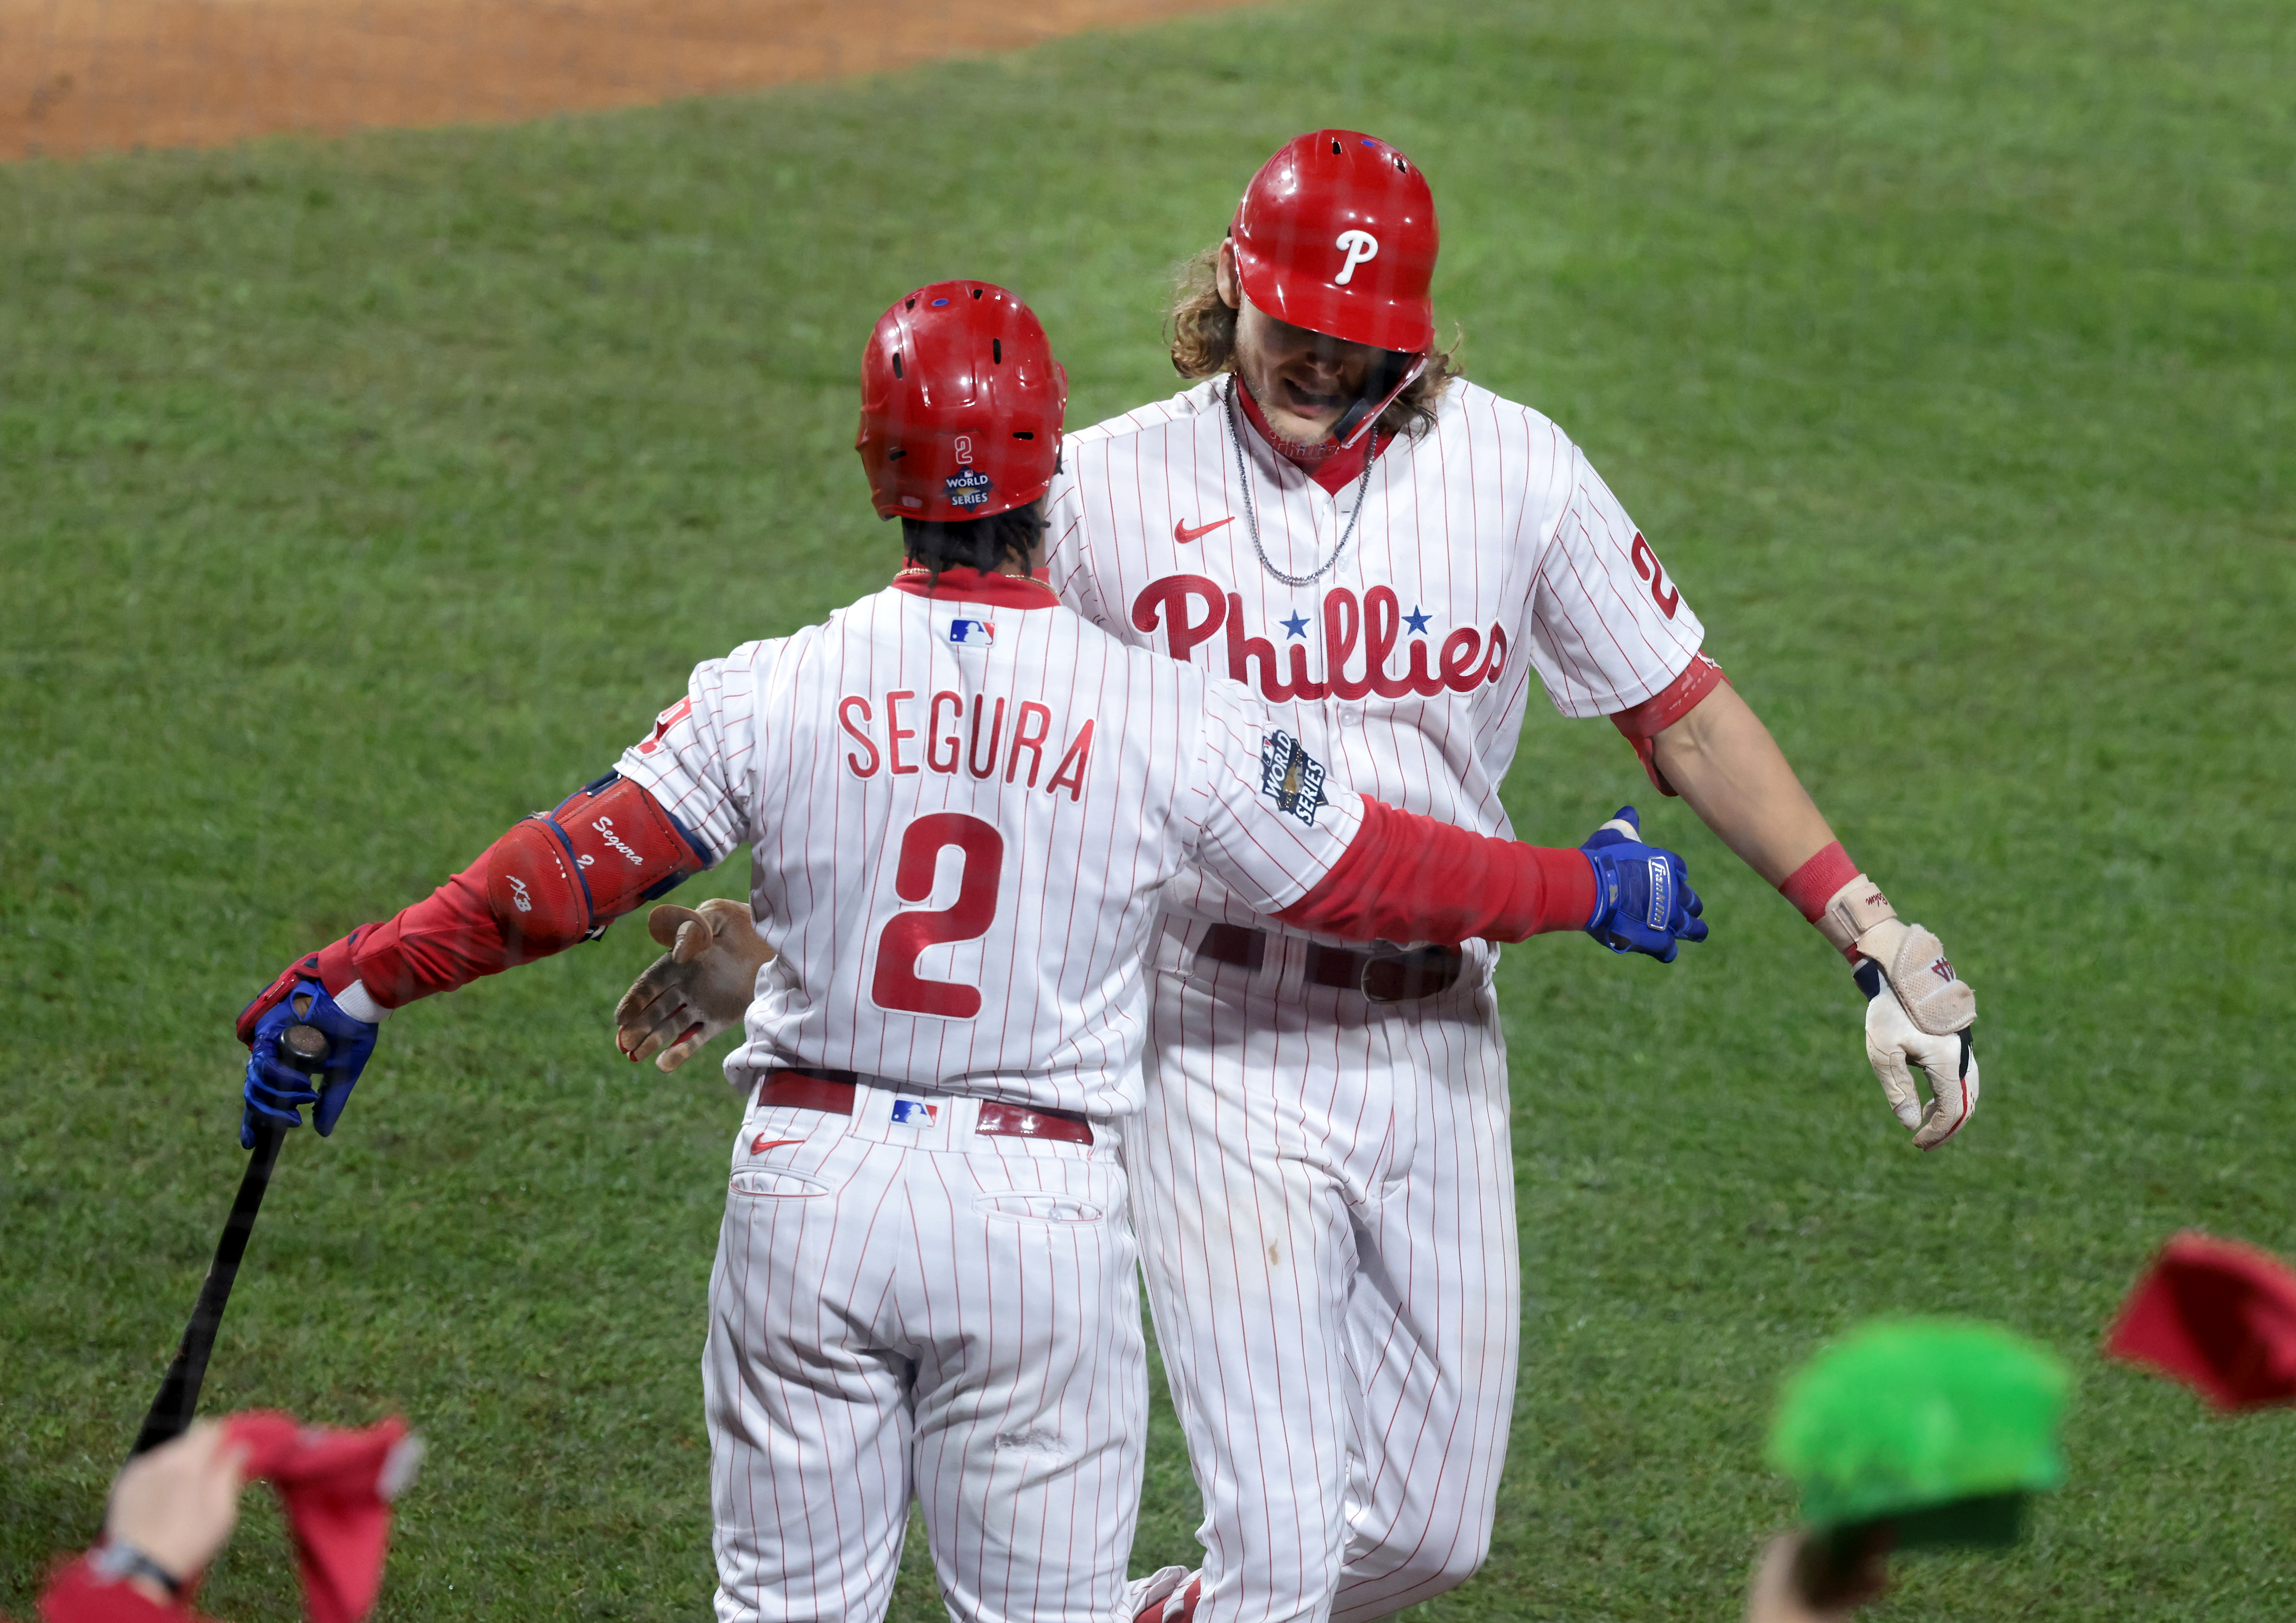 Alec Bohm (28) of the Philadelphia Phillies is congratulated by Jean Segura (2) after hitting a home run in the second inning vs. the Houston Astros during Game 3 of the World Series at Citizens Bank Park, Tuesday, Nov. 1 2022.